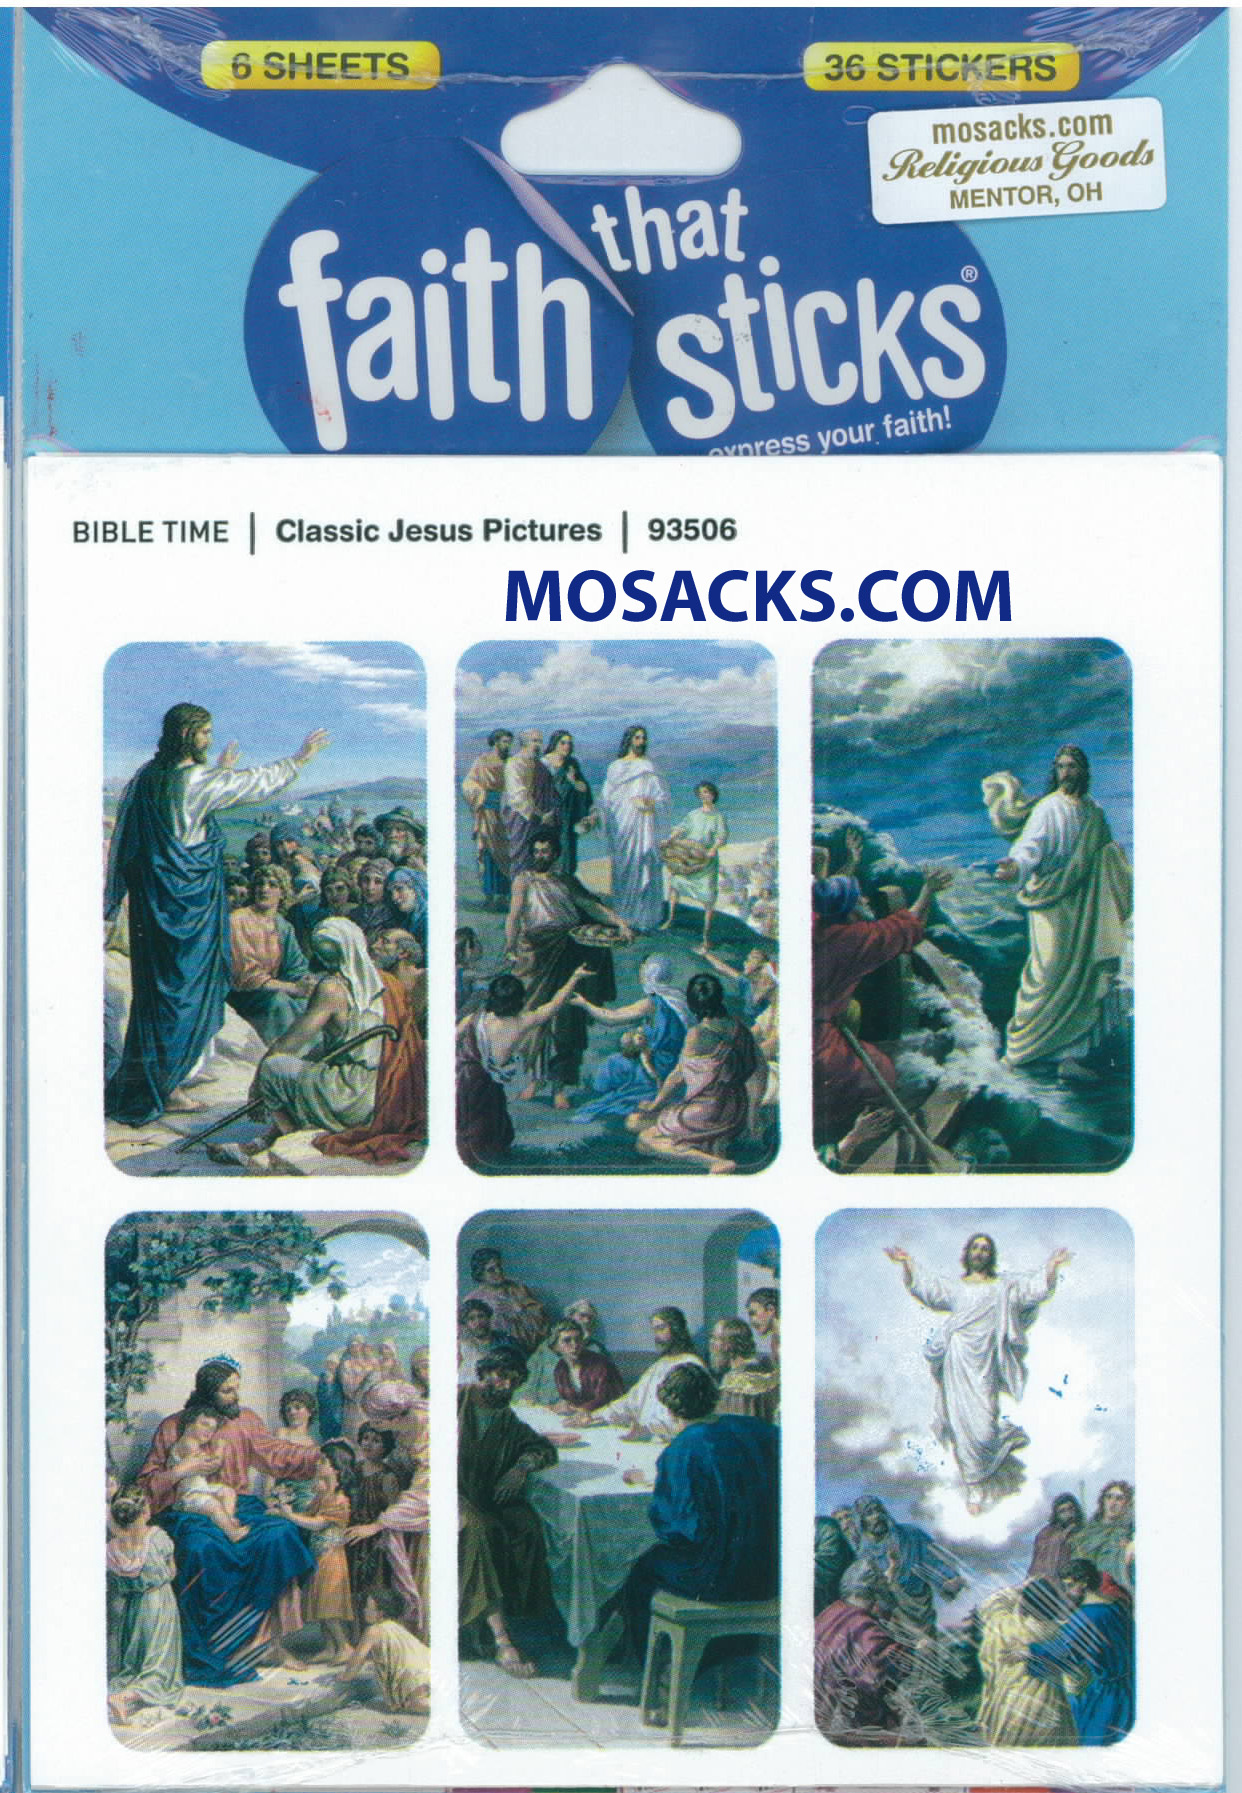 Christian Stickers & Catholic Stickers Faith That Sticks Classic Jesus Pictures 87-93506 includes 6 Jesus sticker sheets